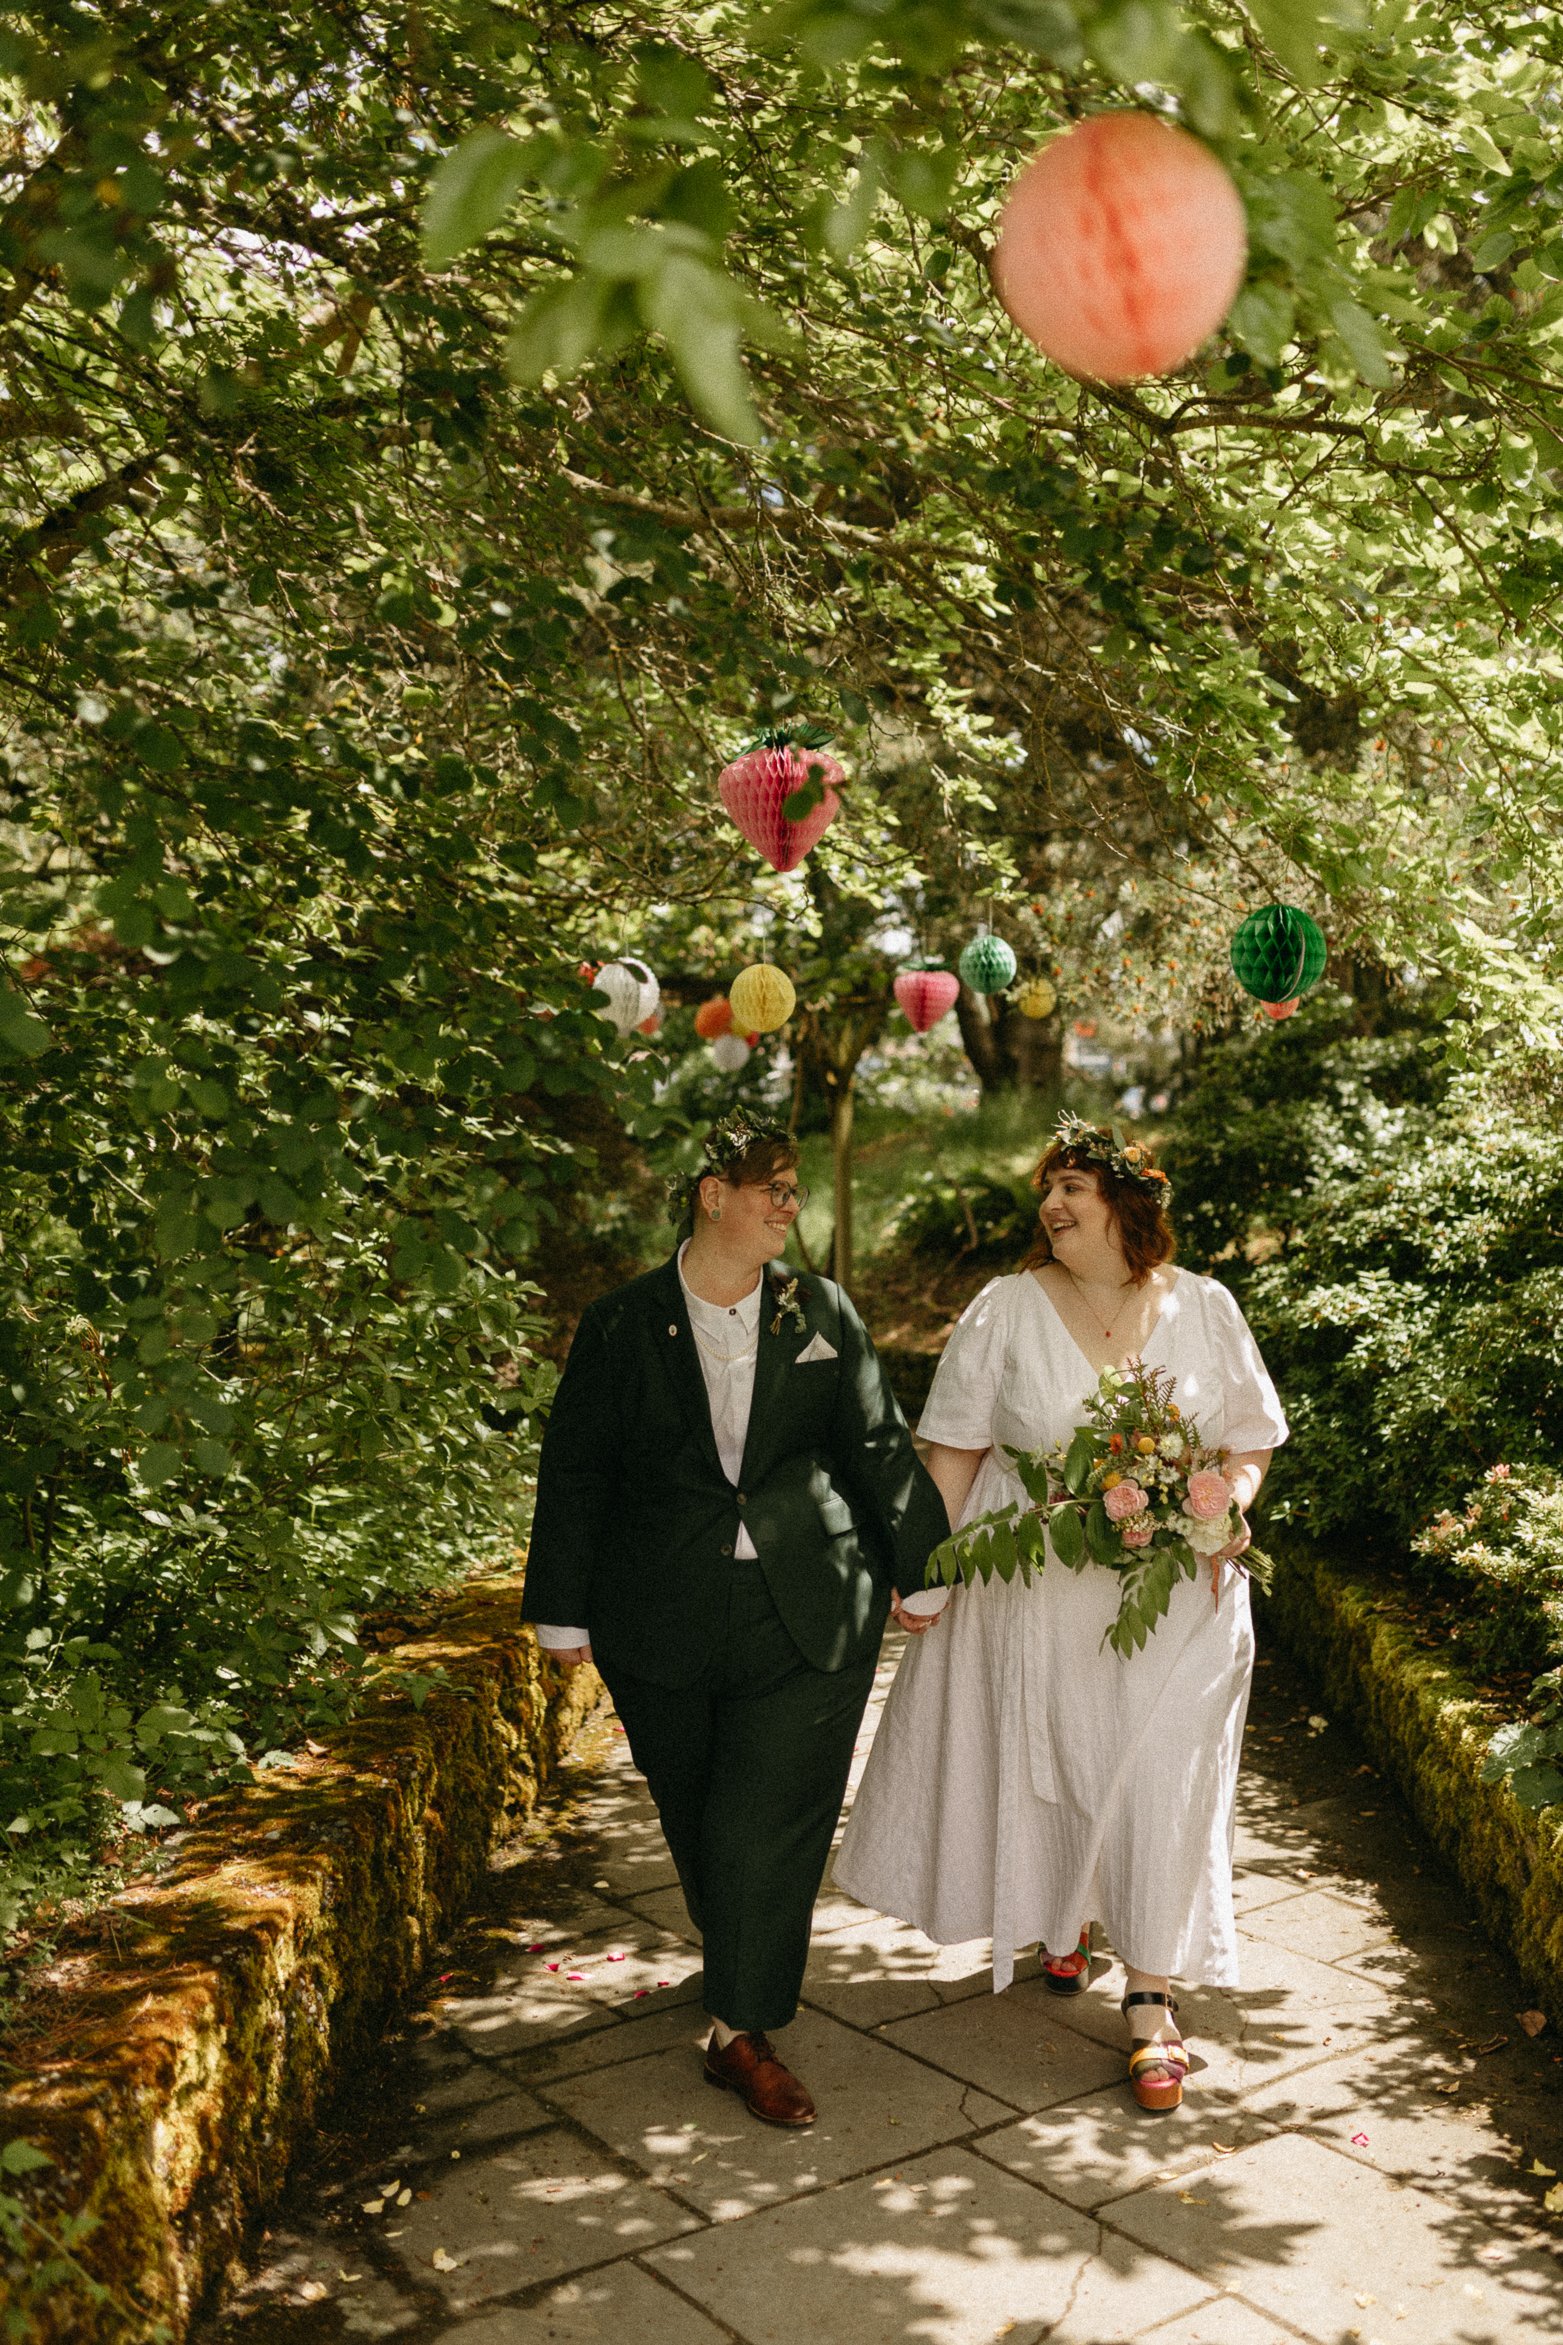 sunsoaked-queer-seattle-washington-arboretum-rose-garden-lqbtq-wedding-by-genderqueer-tacoma-elopement-photographer-halle-roland-photography-29.jpg